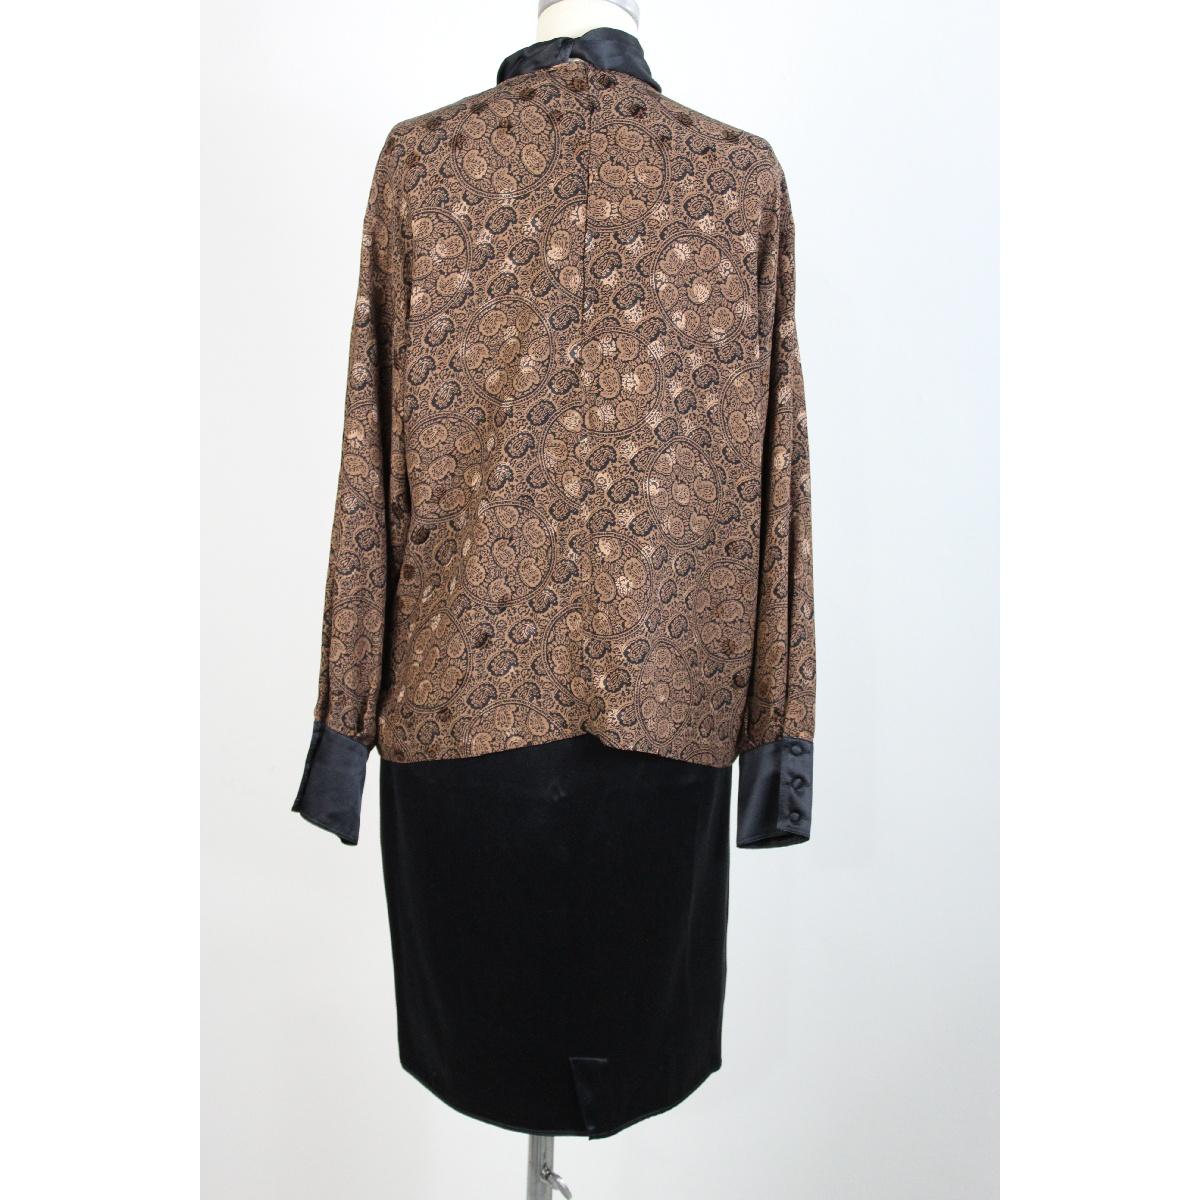 Genny 80s vintage evening skirt suit. Soft blouse with high collar and sash, brown color with paisley designs, black sheath model skirt. 100% silk fabric. Made in Italy.

Size 44 IT; 10 Us; 12 UK

Shoulder: 44 cm
Bust/chest: 58 cm
Sleeve: 60